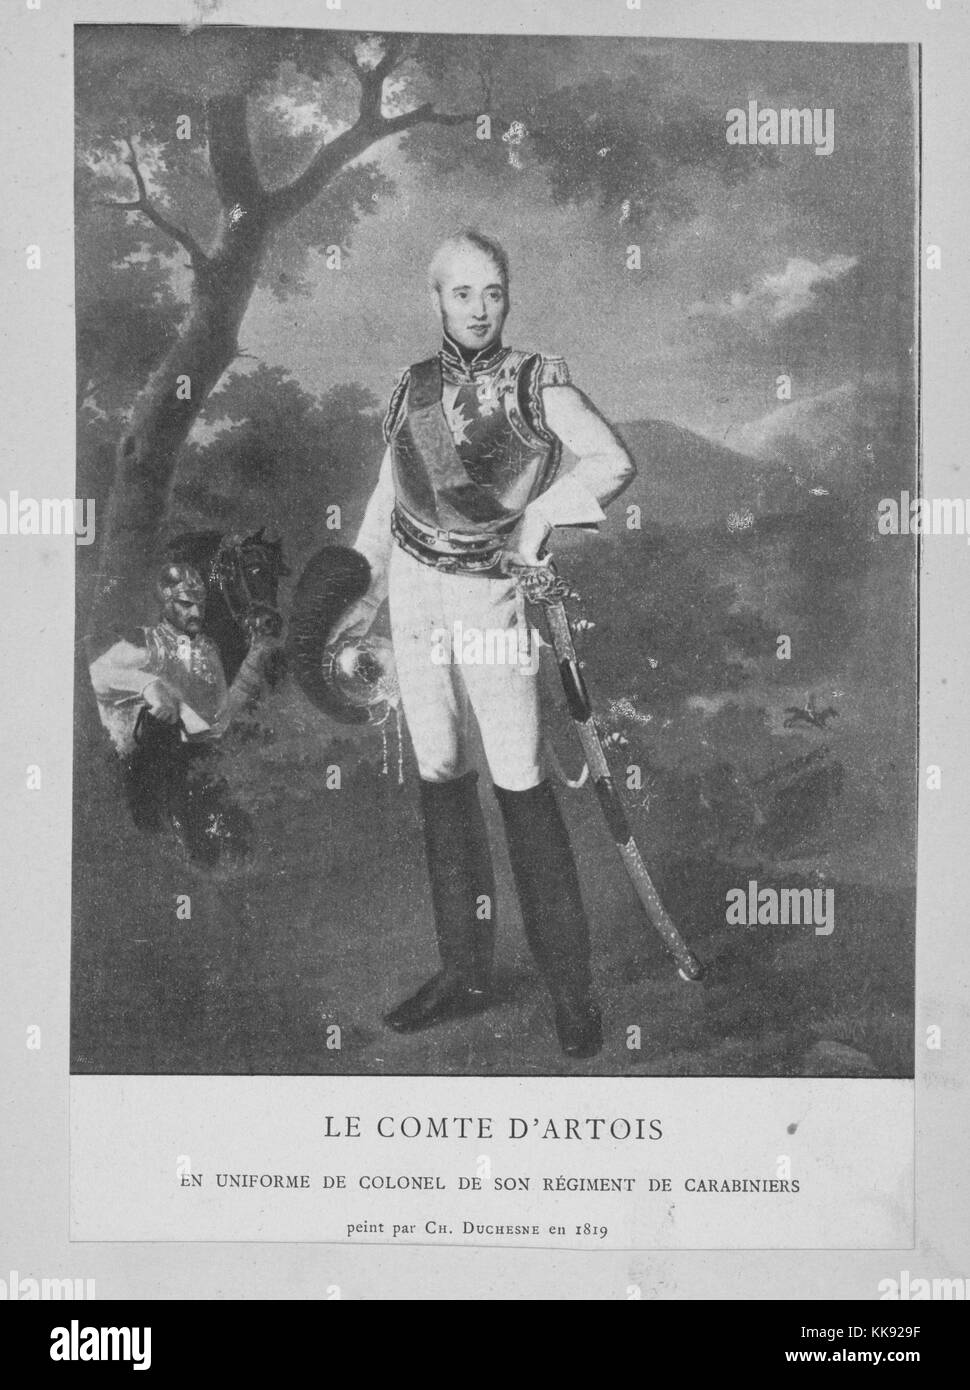 A full length portrait of Charles X of France, in the image he is shown wearing the military uniform of a colonel, he is wearing armor on his chest and is holding his helmet, he has a sword hanging from his hip, at the time of the portrait he was known by his title the comte d'Artois, his family fled France during the French Revolution, he eventually became King of France but was forced from power during the French Revolution of 1830, France, 1760. From the New York Public Library. Stock Photo